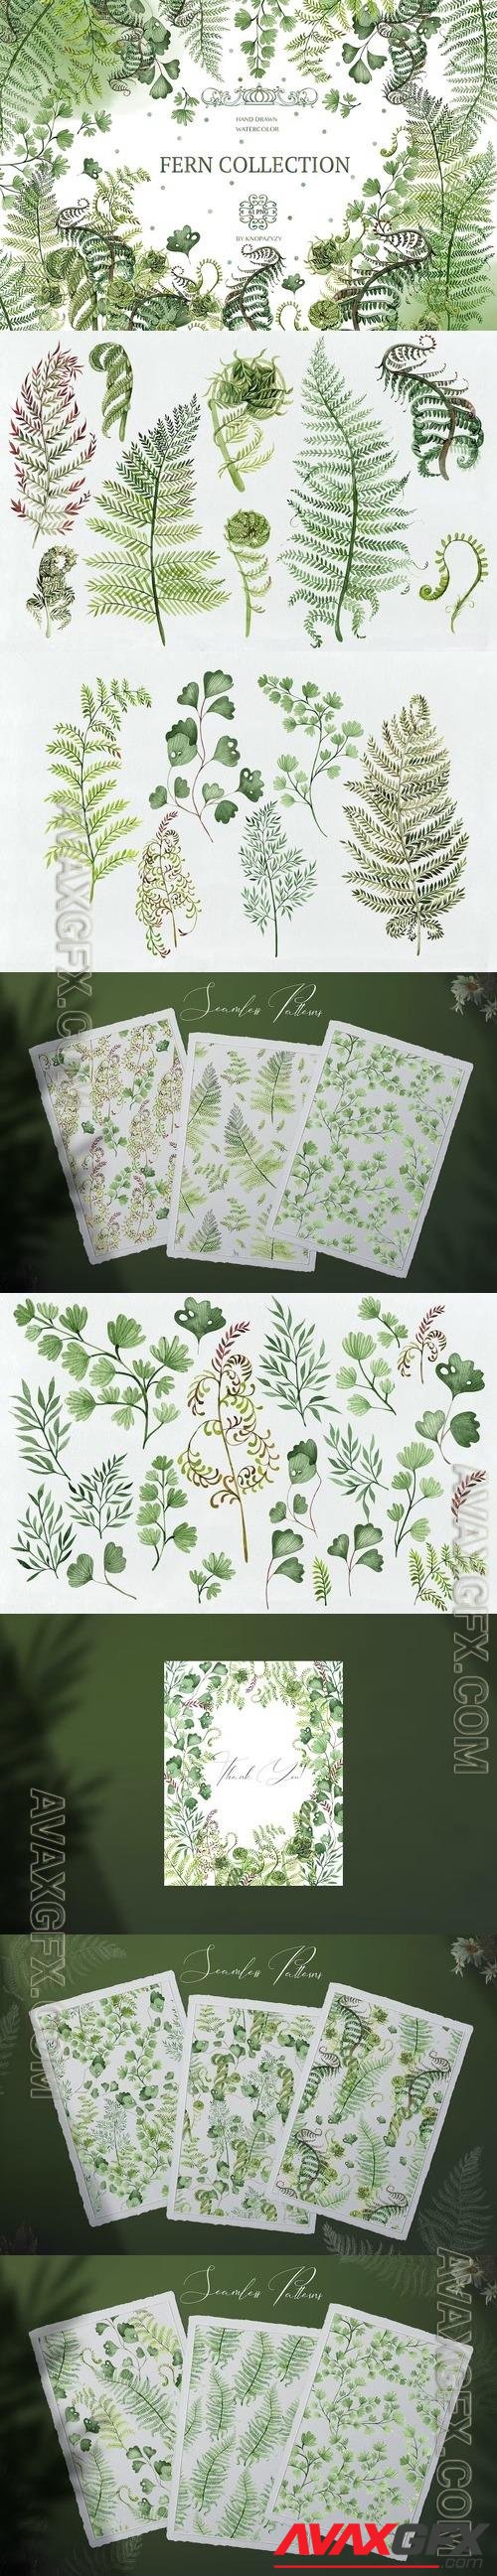 Watercolor Fern Collection W7MKD4F